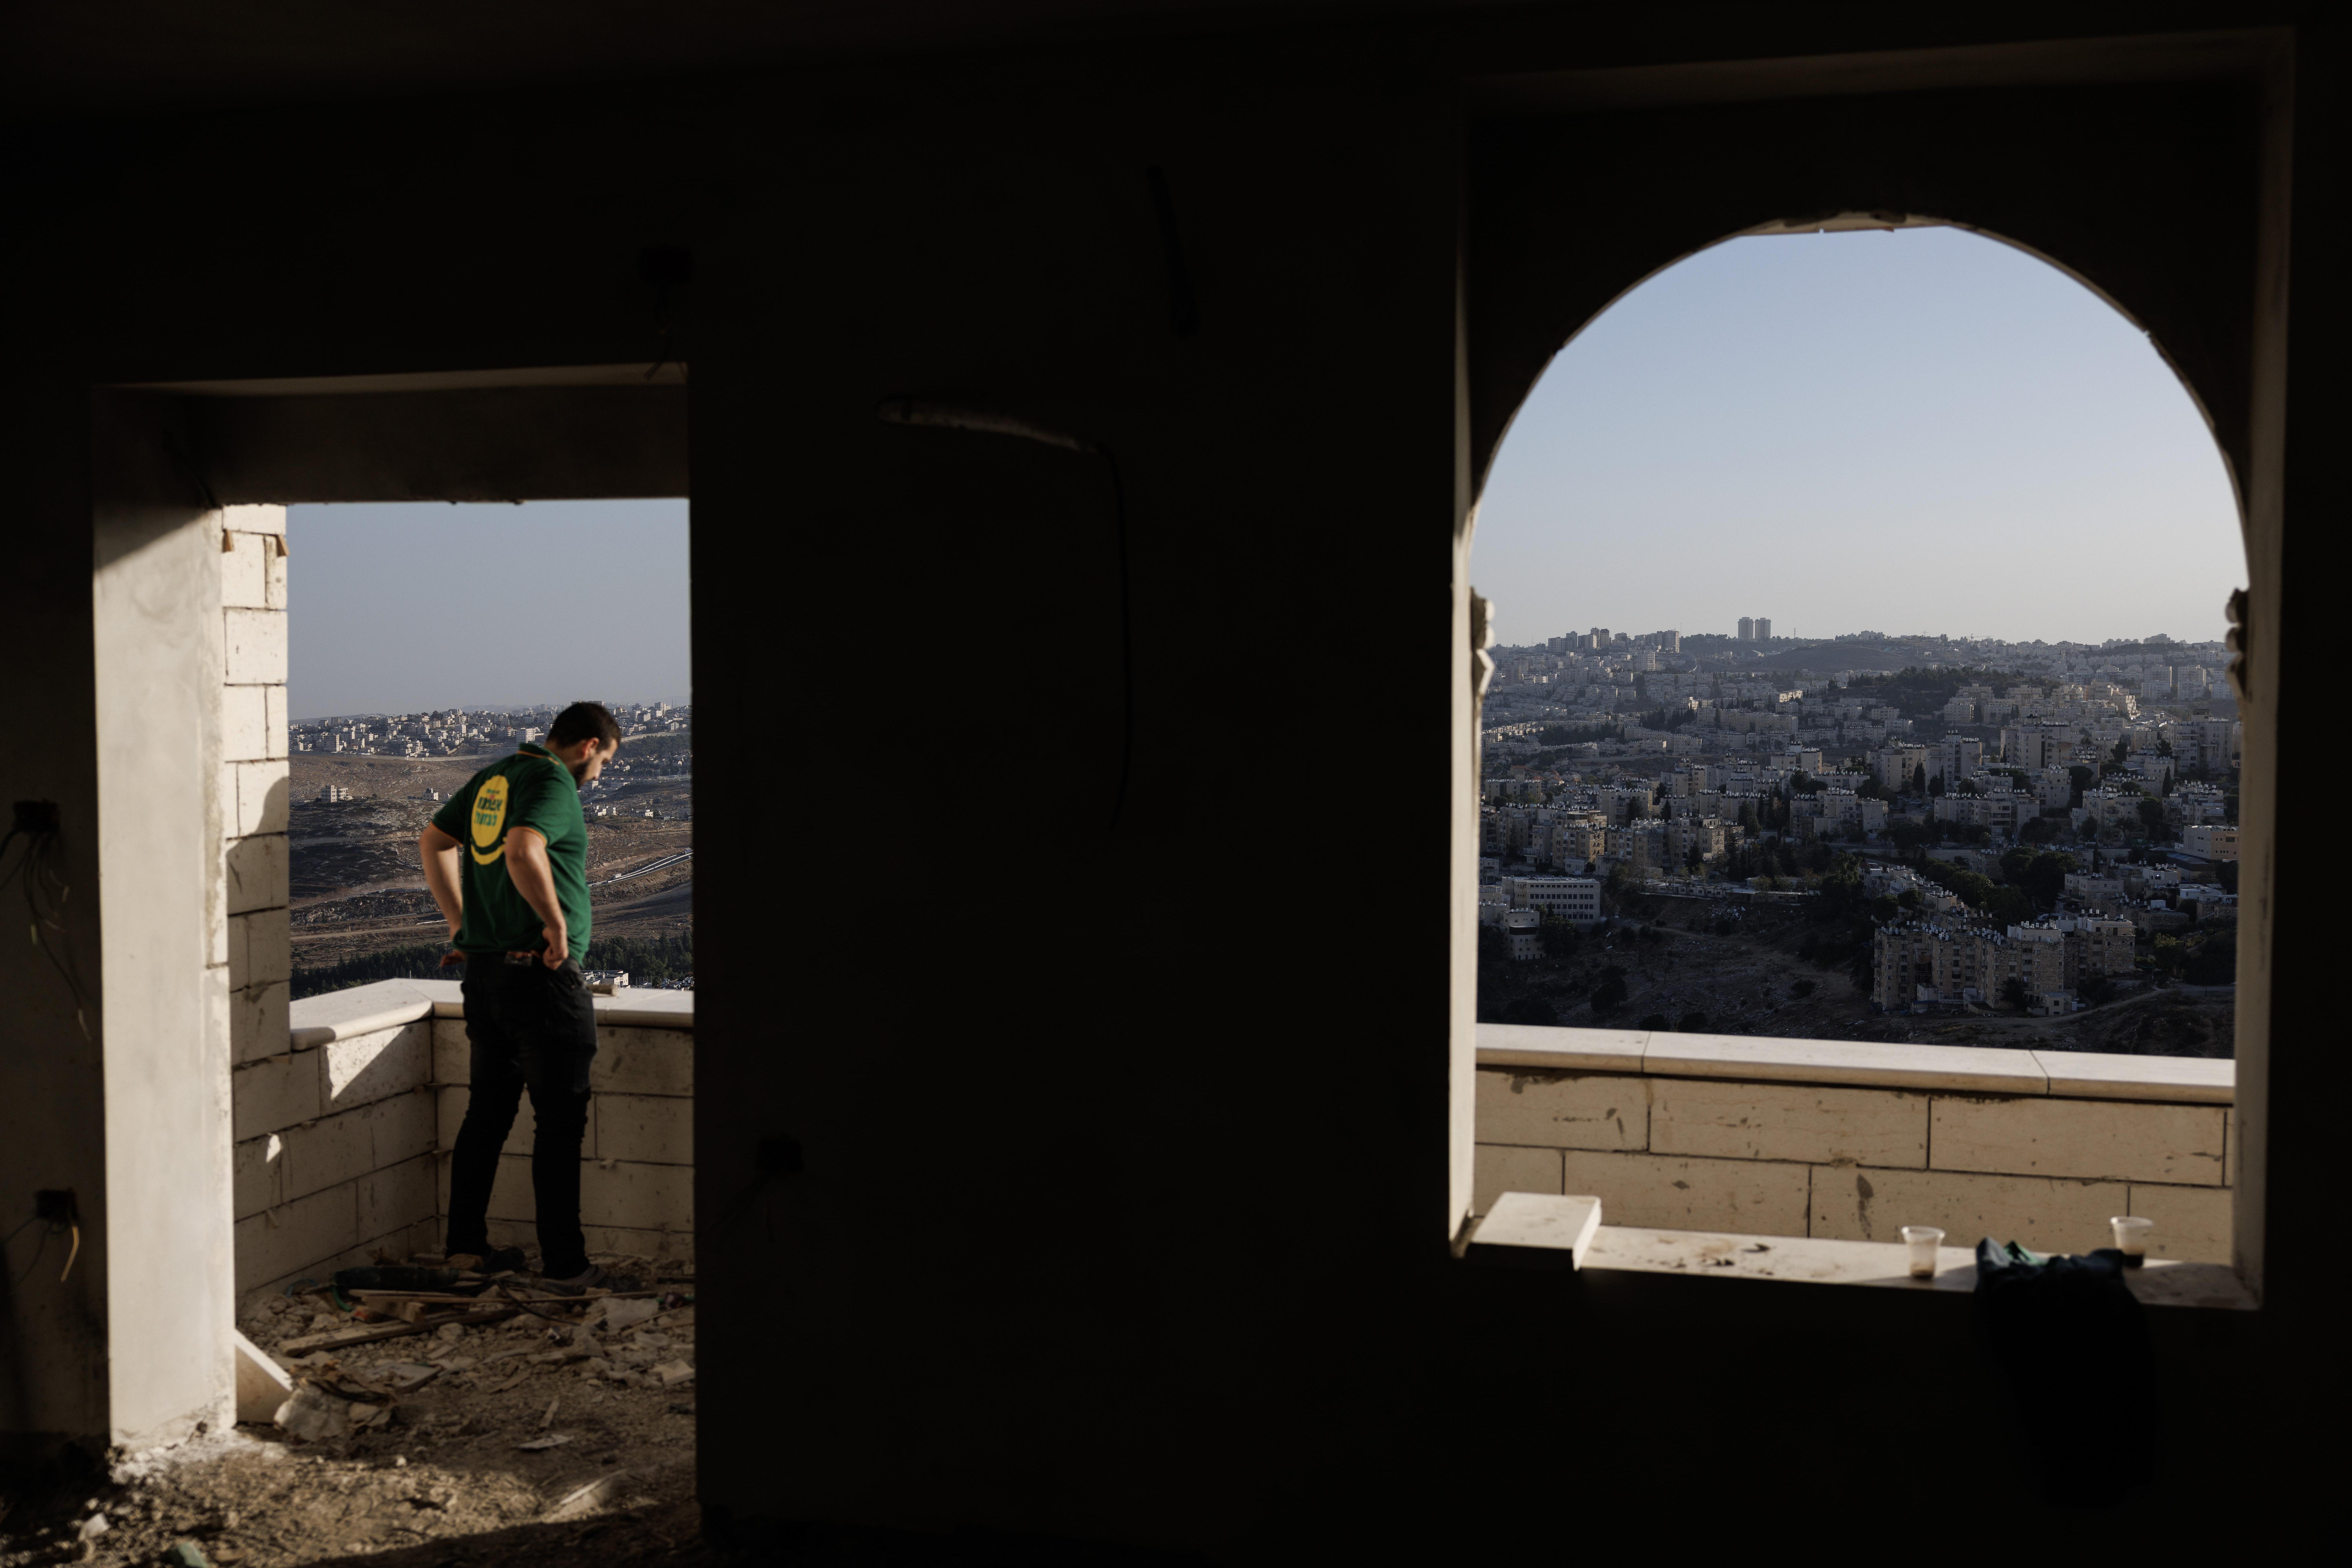 A man stands in the opening made by the doorway of a building overlooking the West Bank.